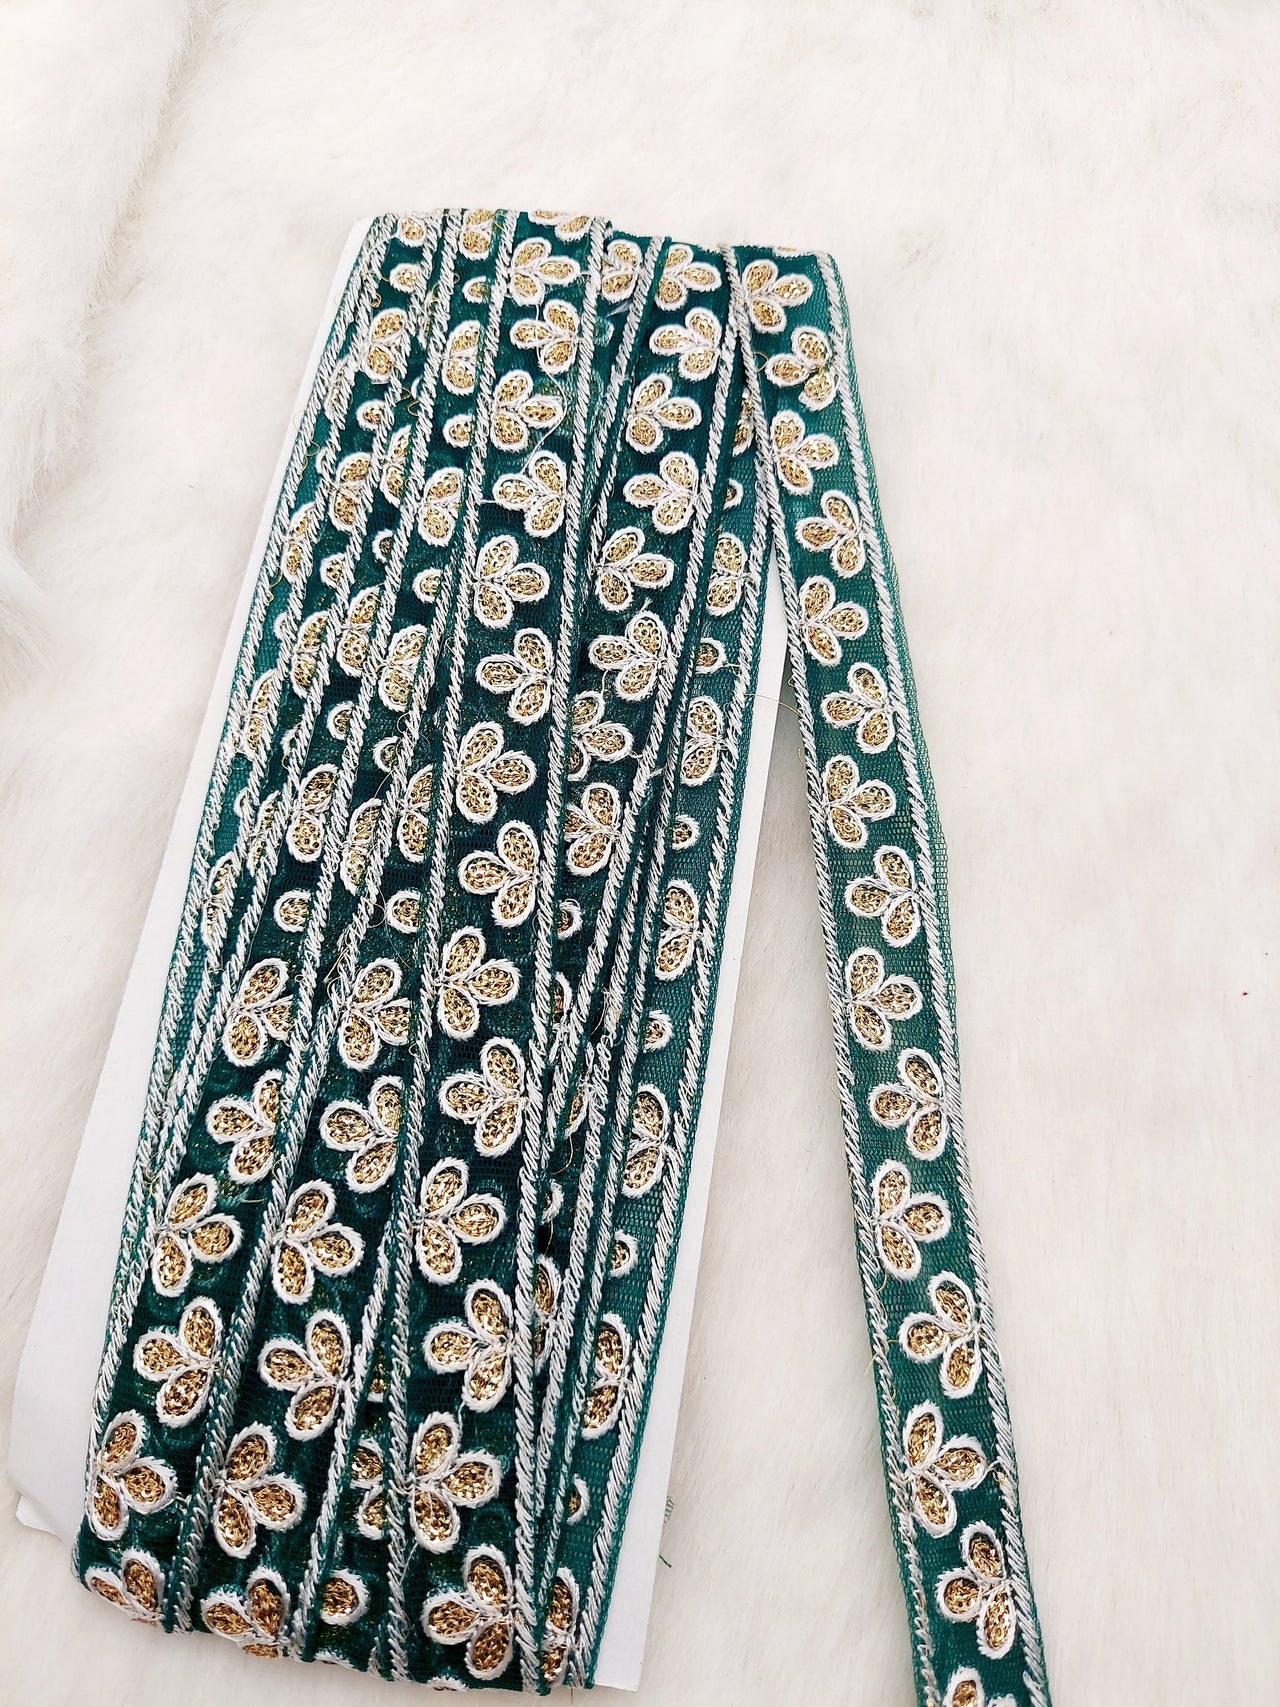 Wholesale Dark Green Net Lace Floral Embroidery & Glitter Gold Sequins, Indian Wedding Border, Gifting Ribbon Costume Trim Fashion Trimming